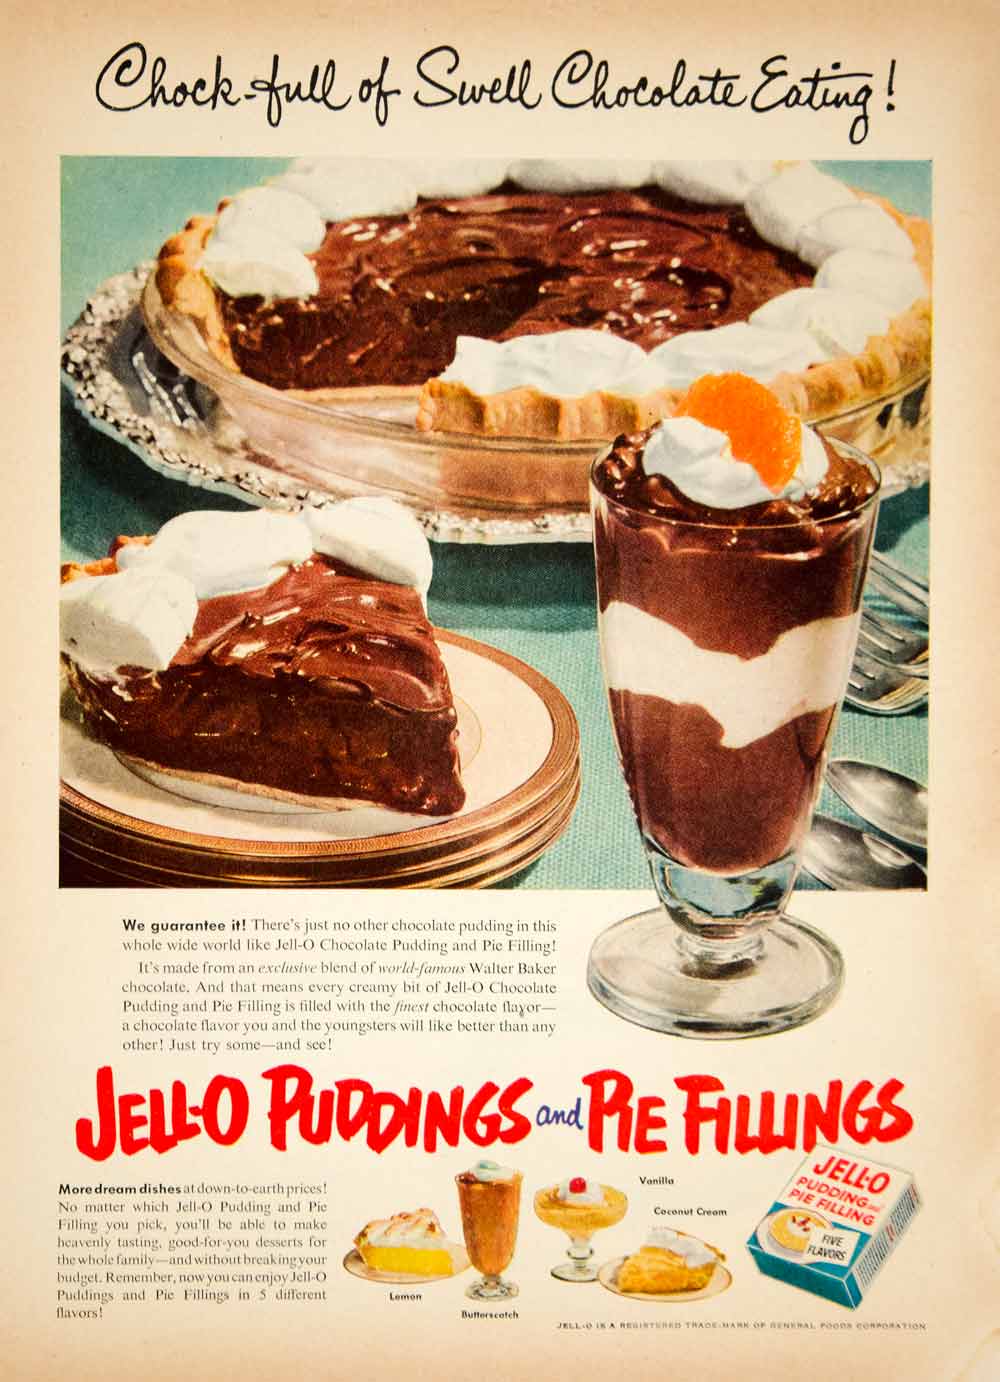 1952 Ad General Foods Jell-O Chocolate Pudding Pie Filling Dessert Baking YBL1